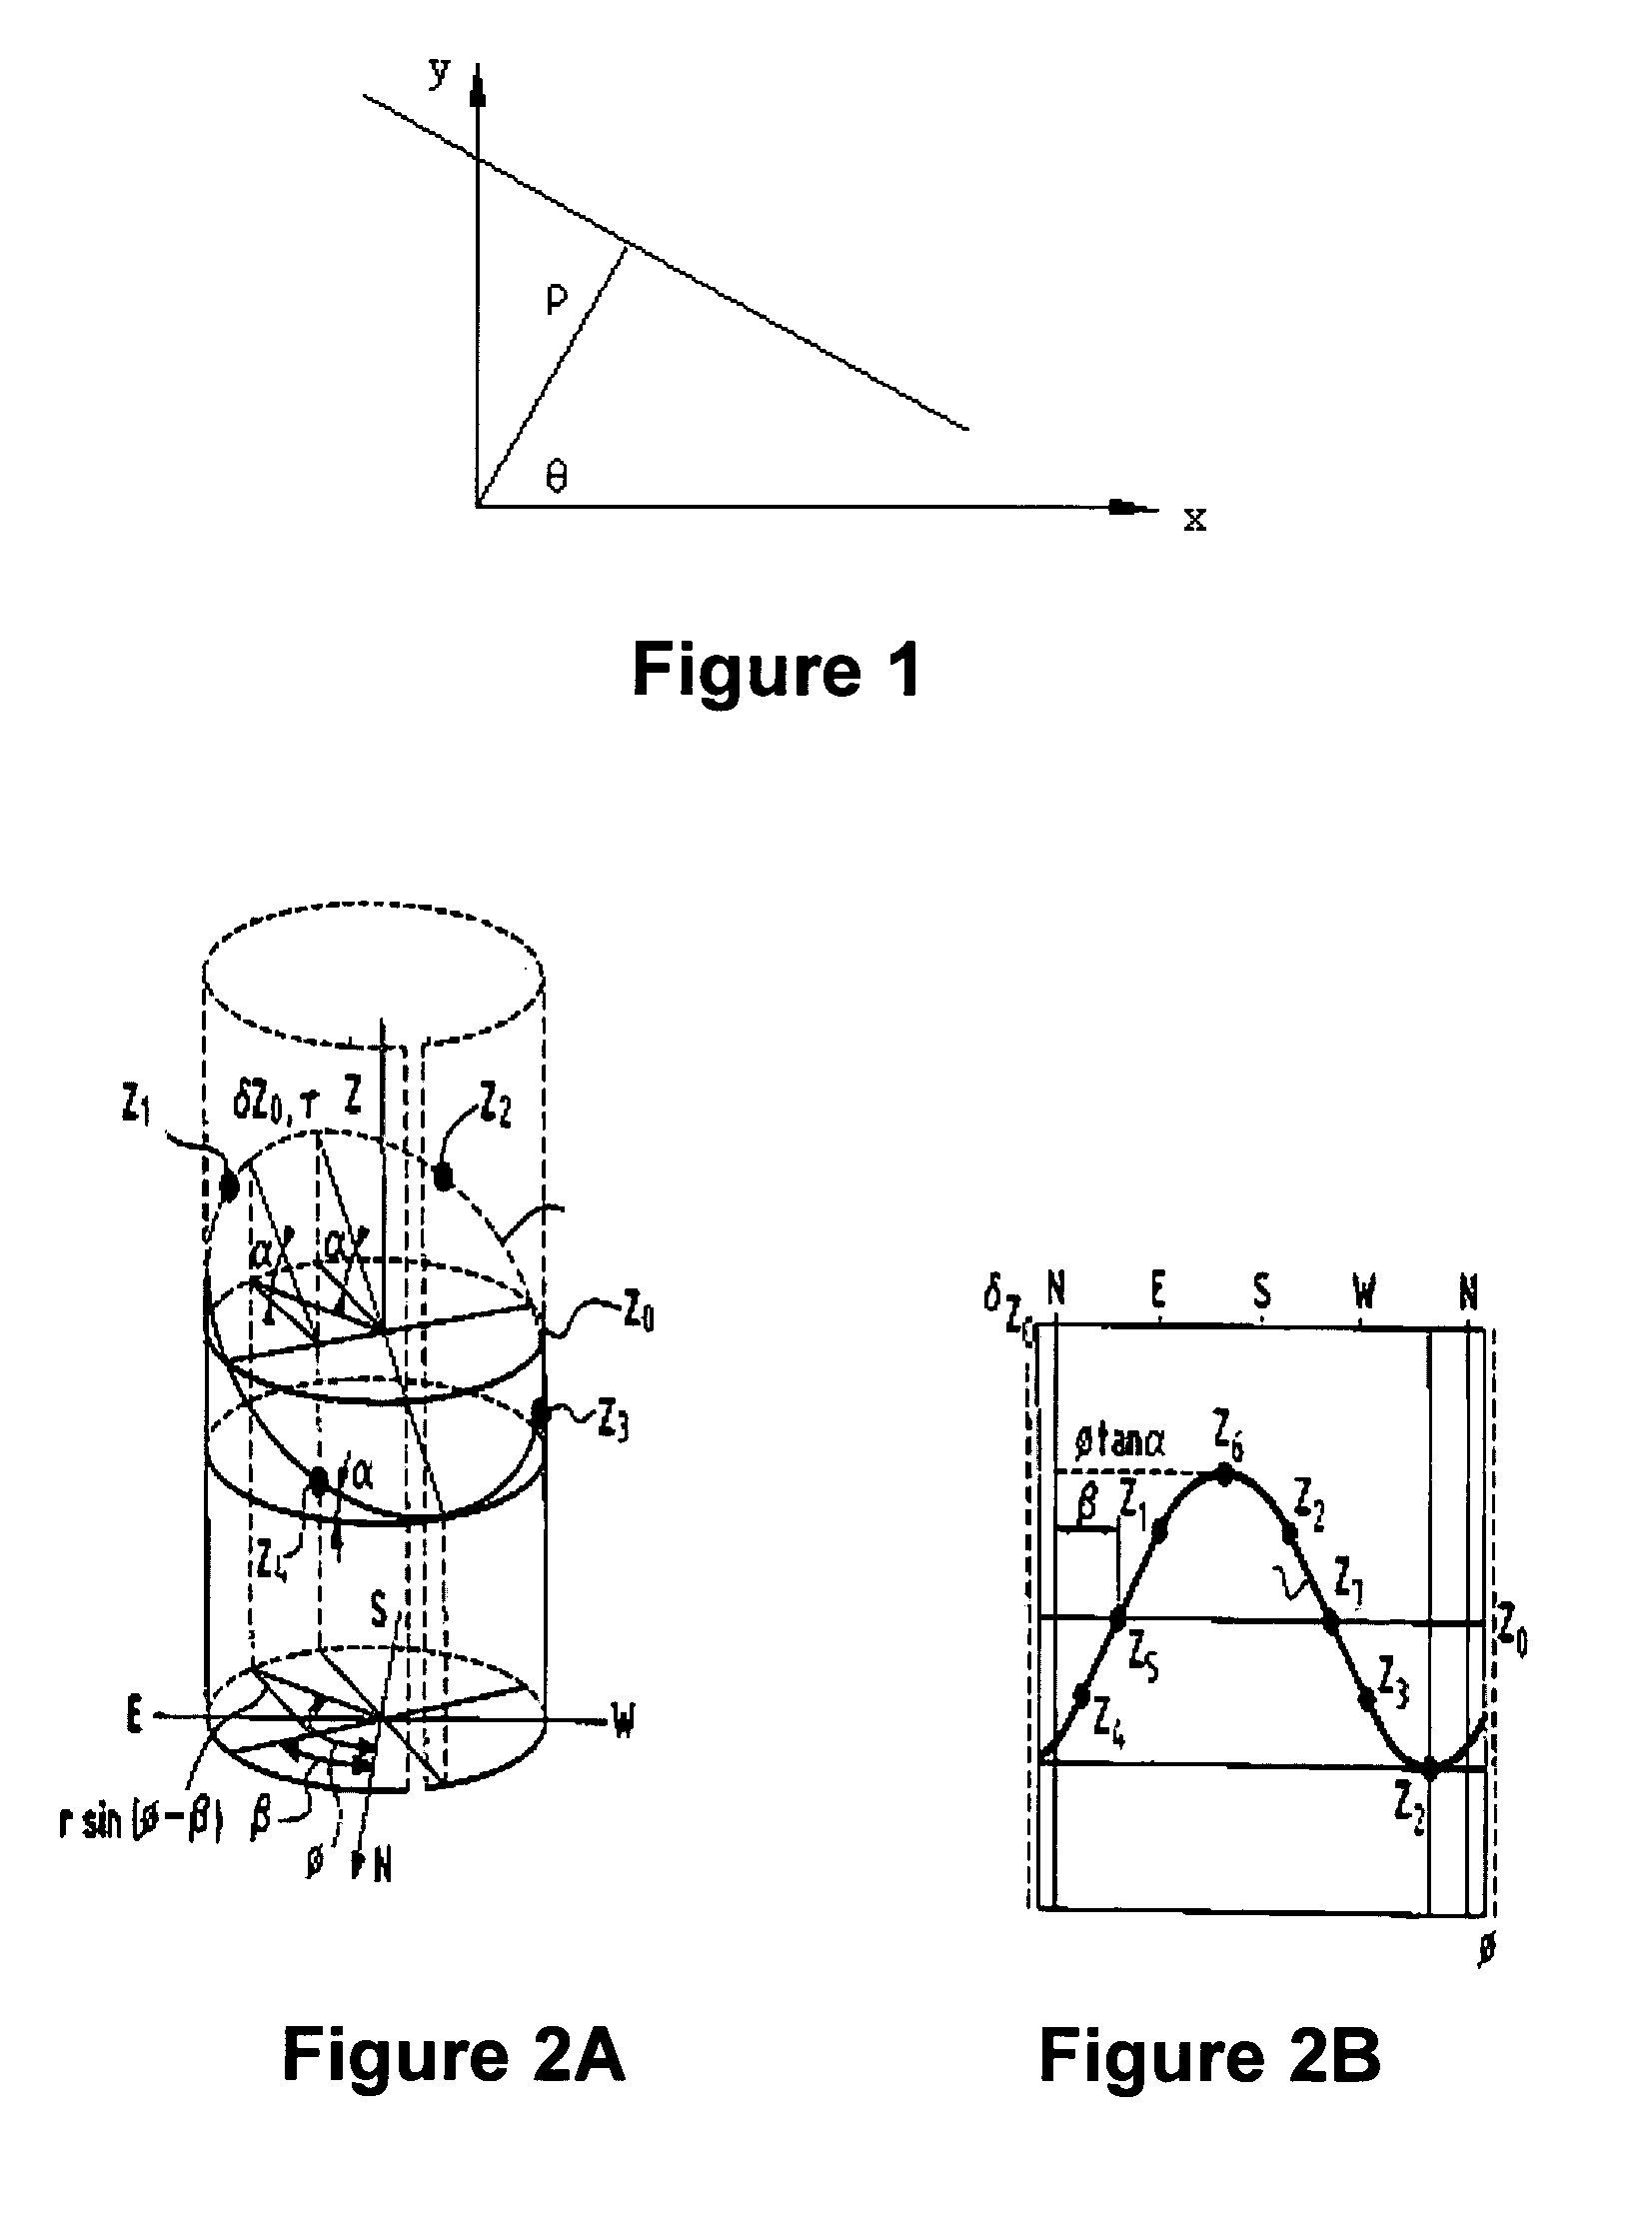 Method of determining planar events from borehole or core images